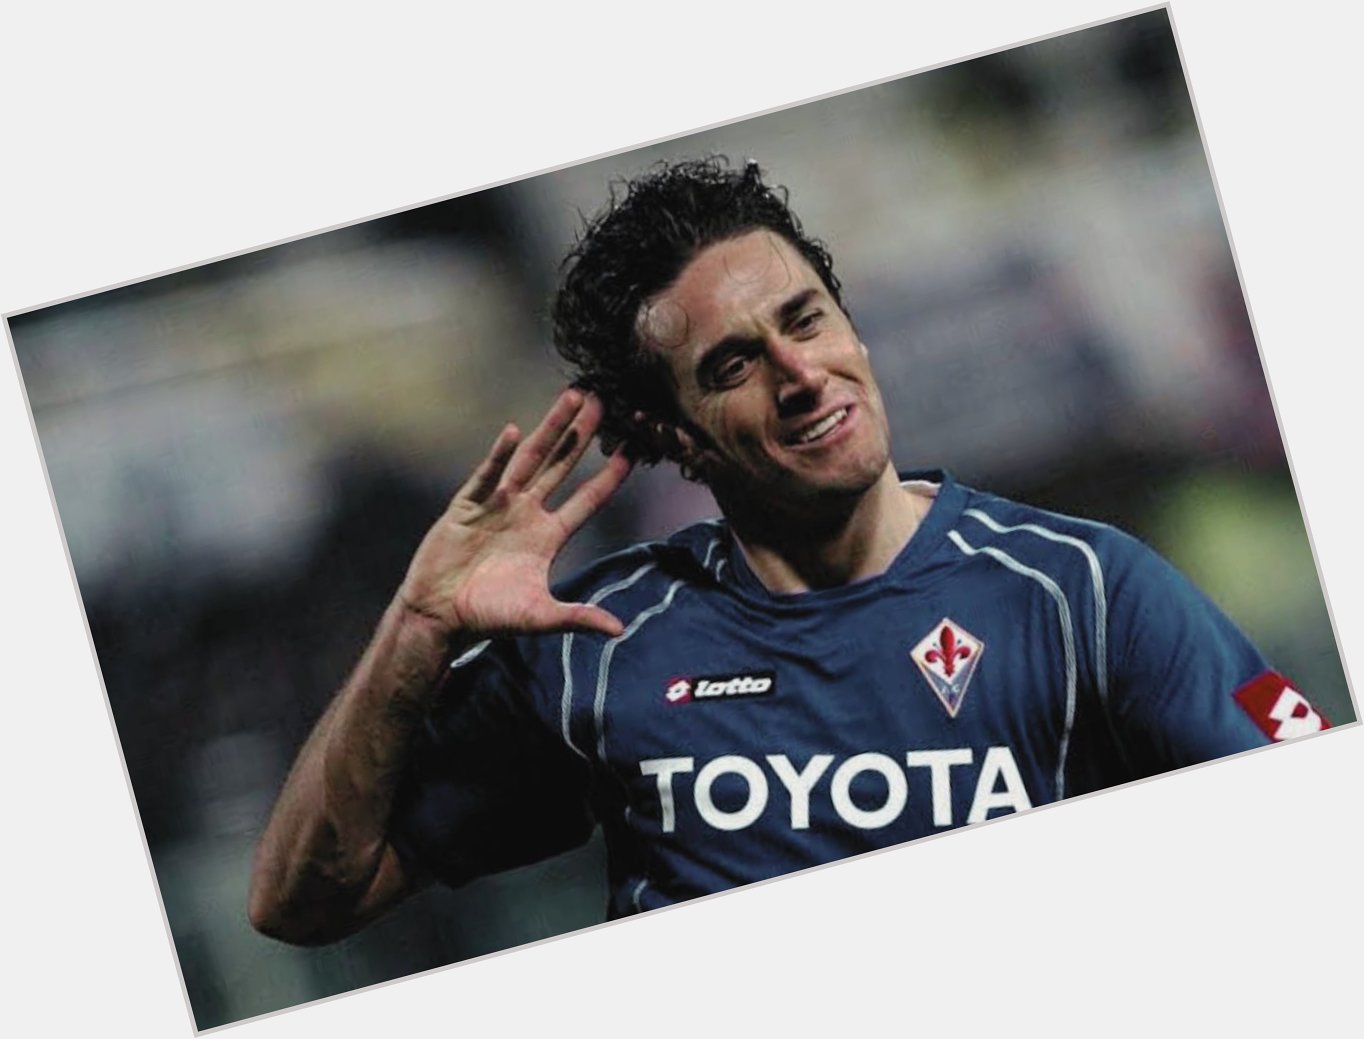 Happy 46th birthday to Luca Toni! Can you guess how many clubs he played for in his career spanning 656 games? 